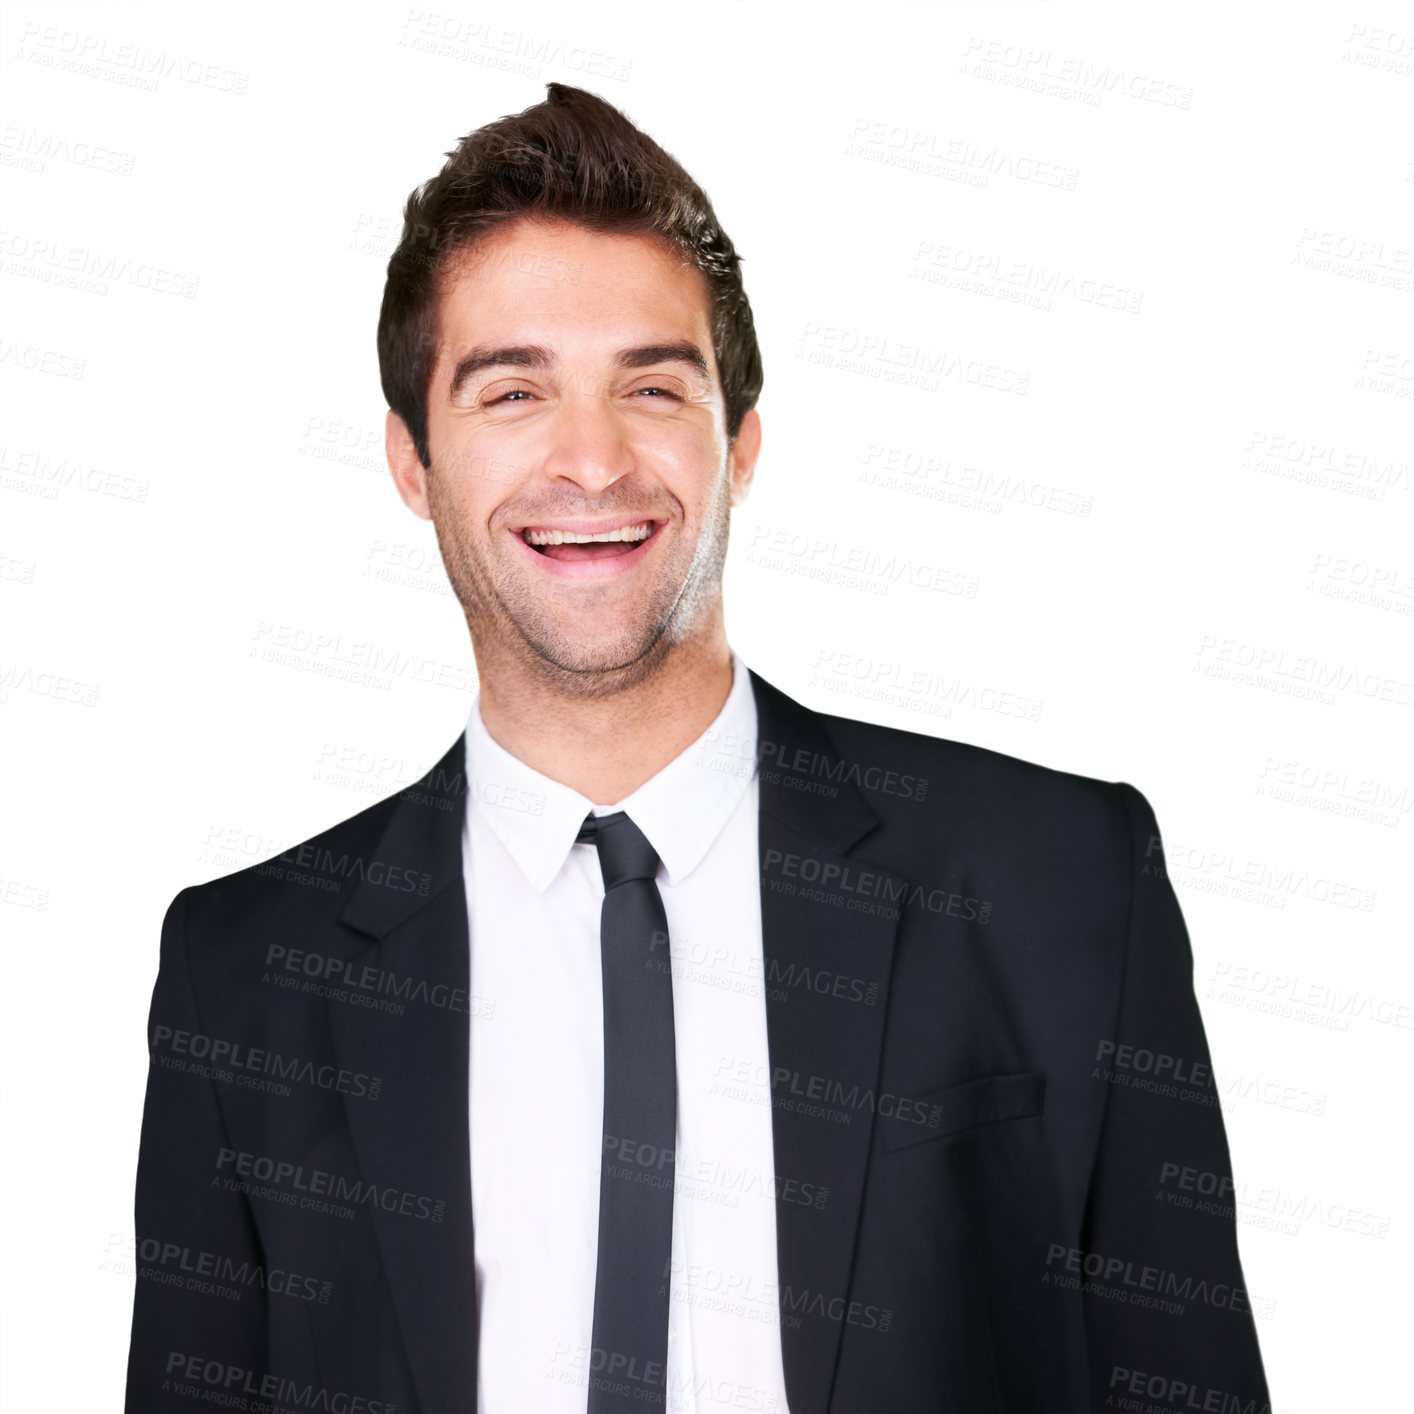 Buy stock photo Business man, laughing and portrait of model on a transparent background for fashion and style. Professional male person isolated in studio for comic png design to laugh at funny meme or joke